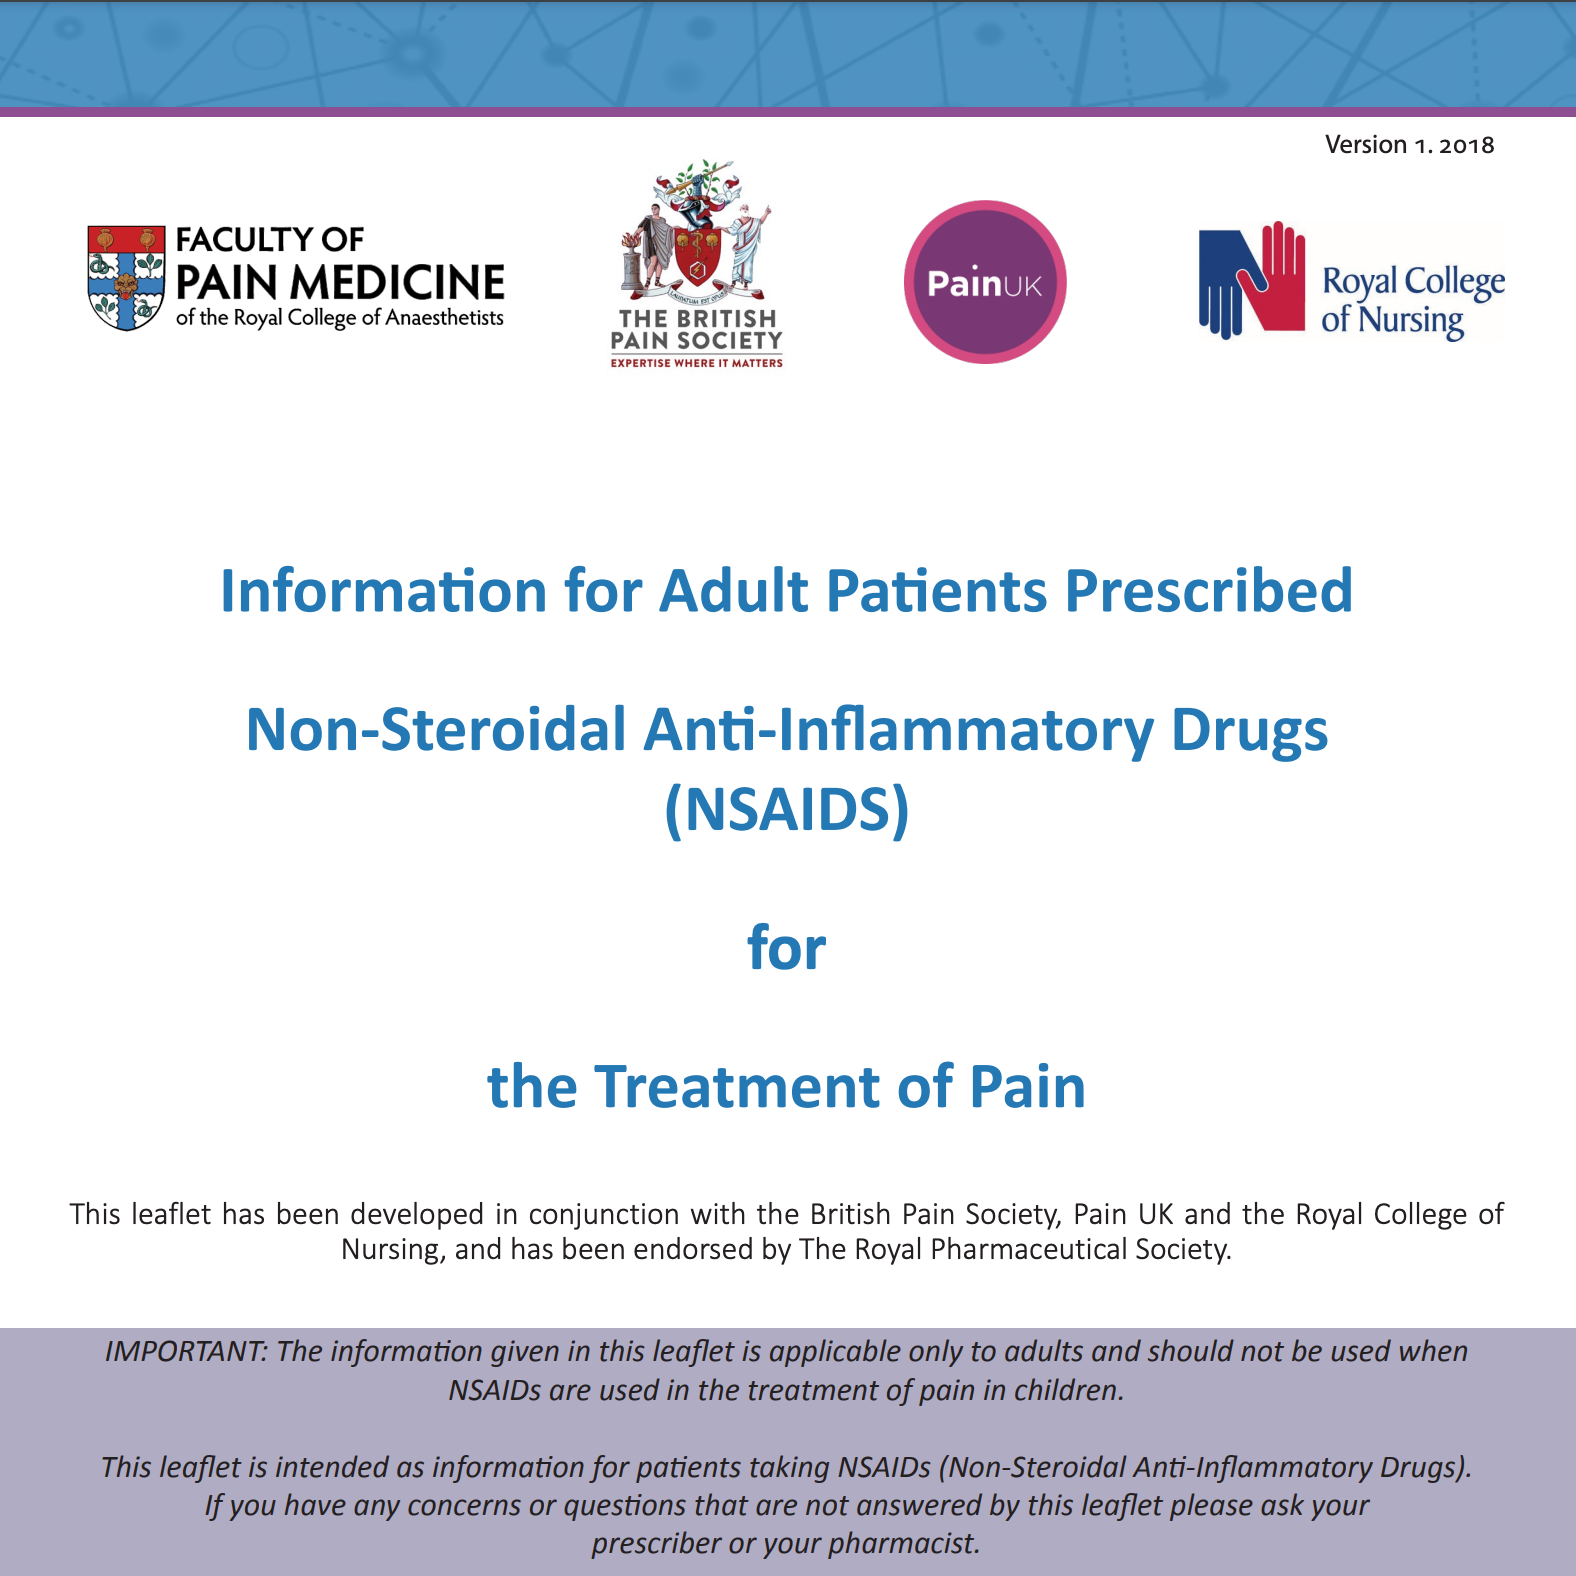 INFORMATION FOR ADULT PATIENTS PRESCRIBED NON-STEROIDAL ANTI-INFLAMMMATORY DRUGS